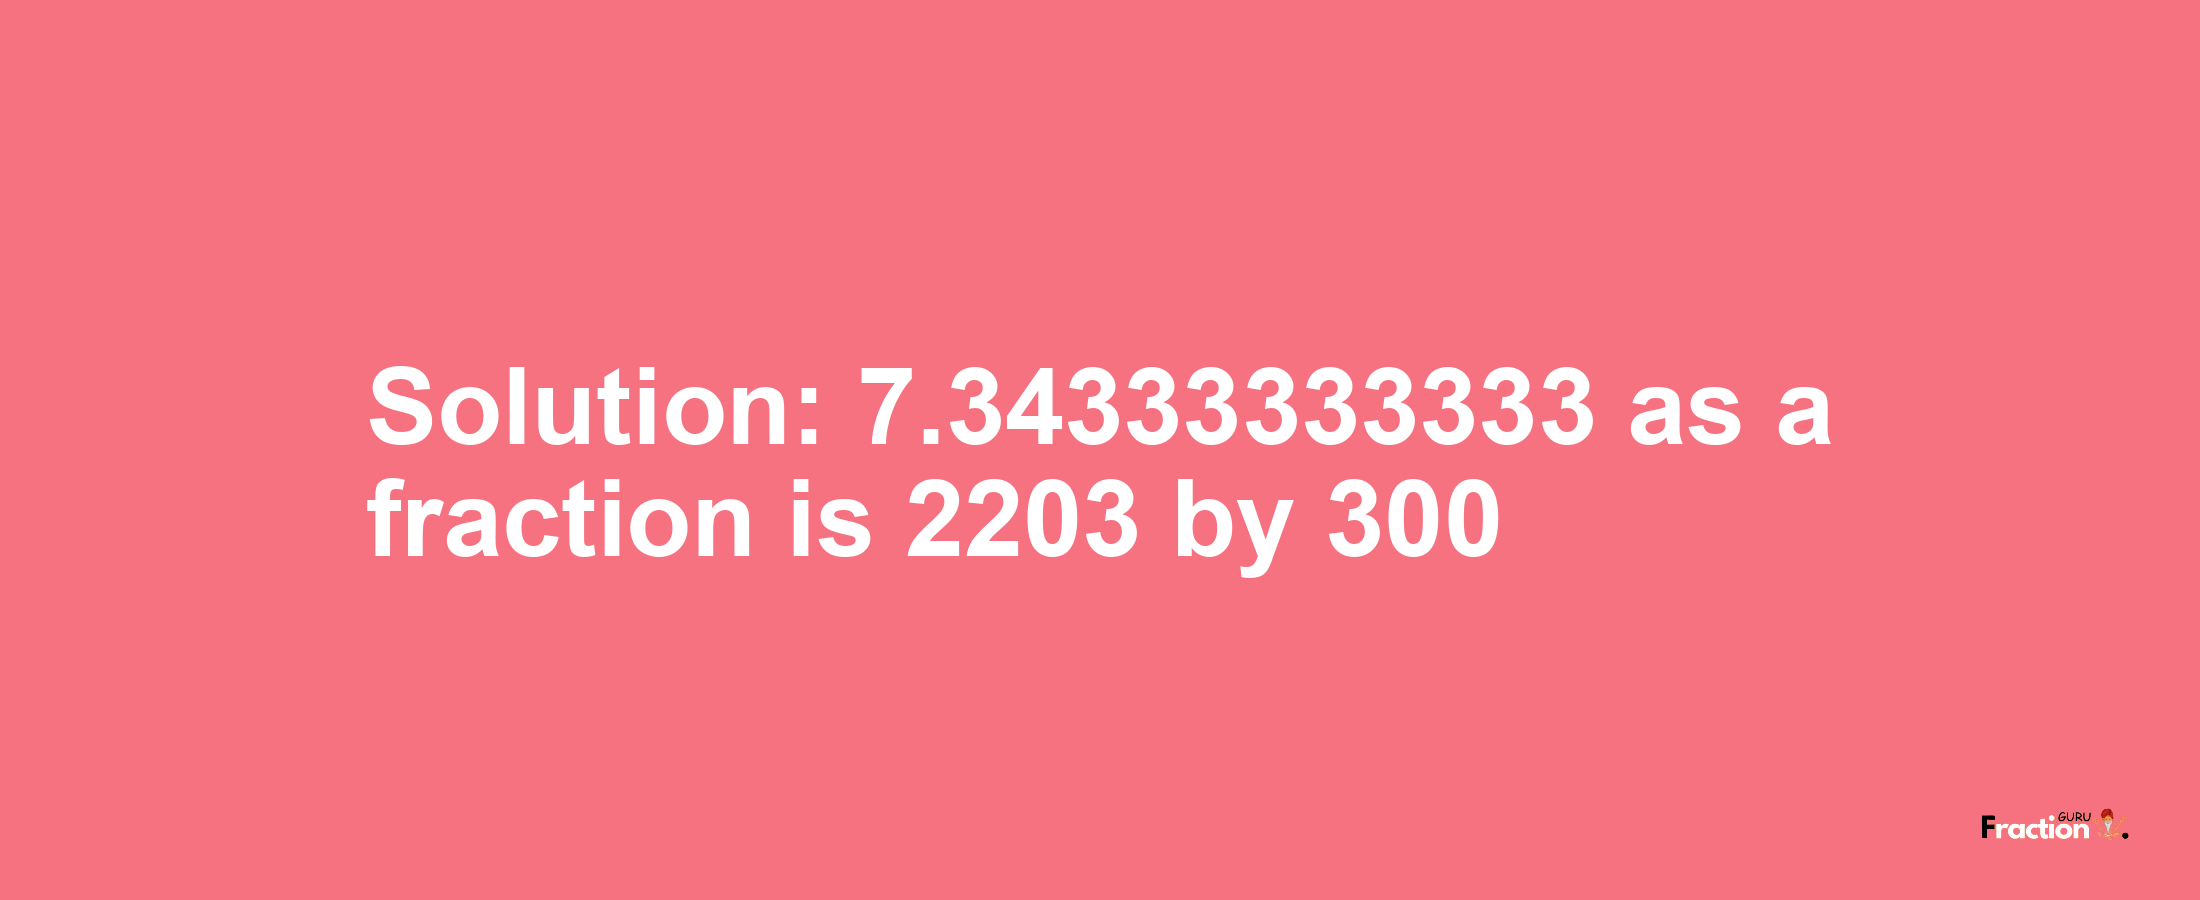 Solution:7.34333333333 as a fraction is 2203/300